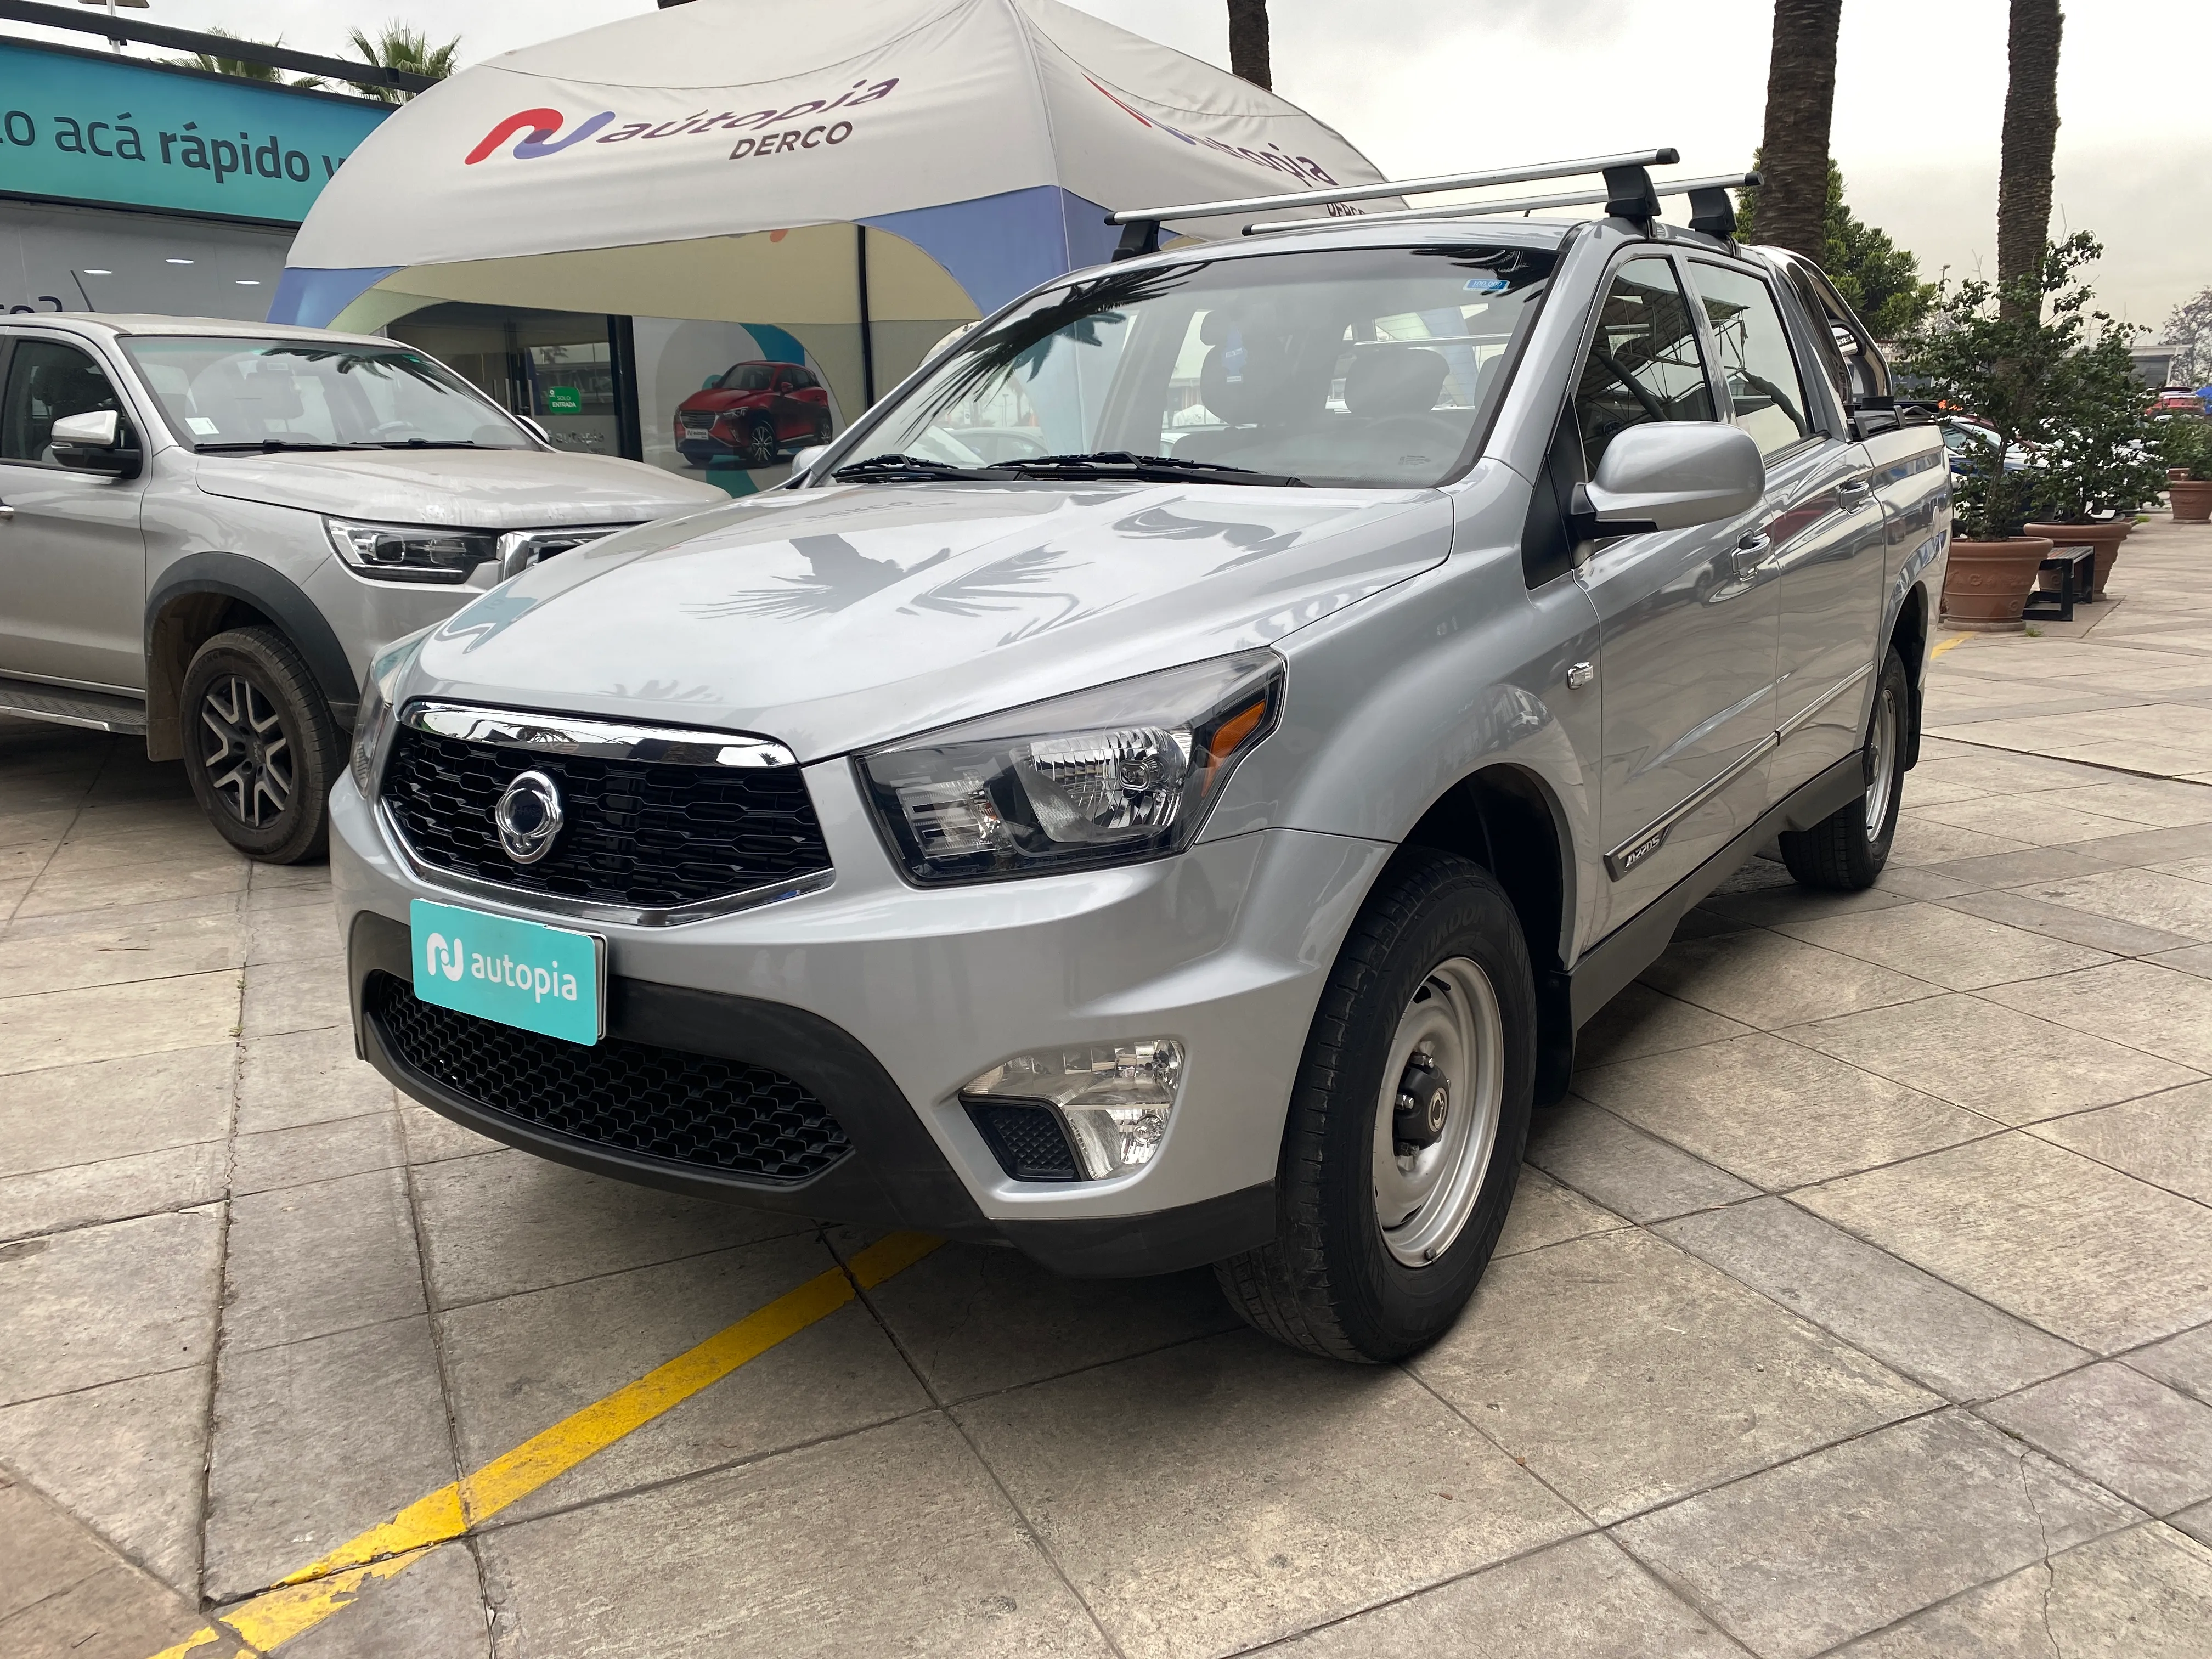 SSANGYONG ACTYON SPORTS 2.2 6AS610AA MT 4X2 DIESEL 2021